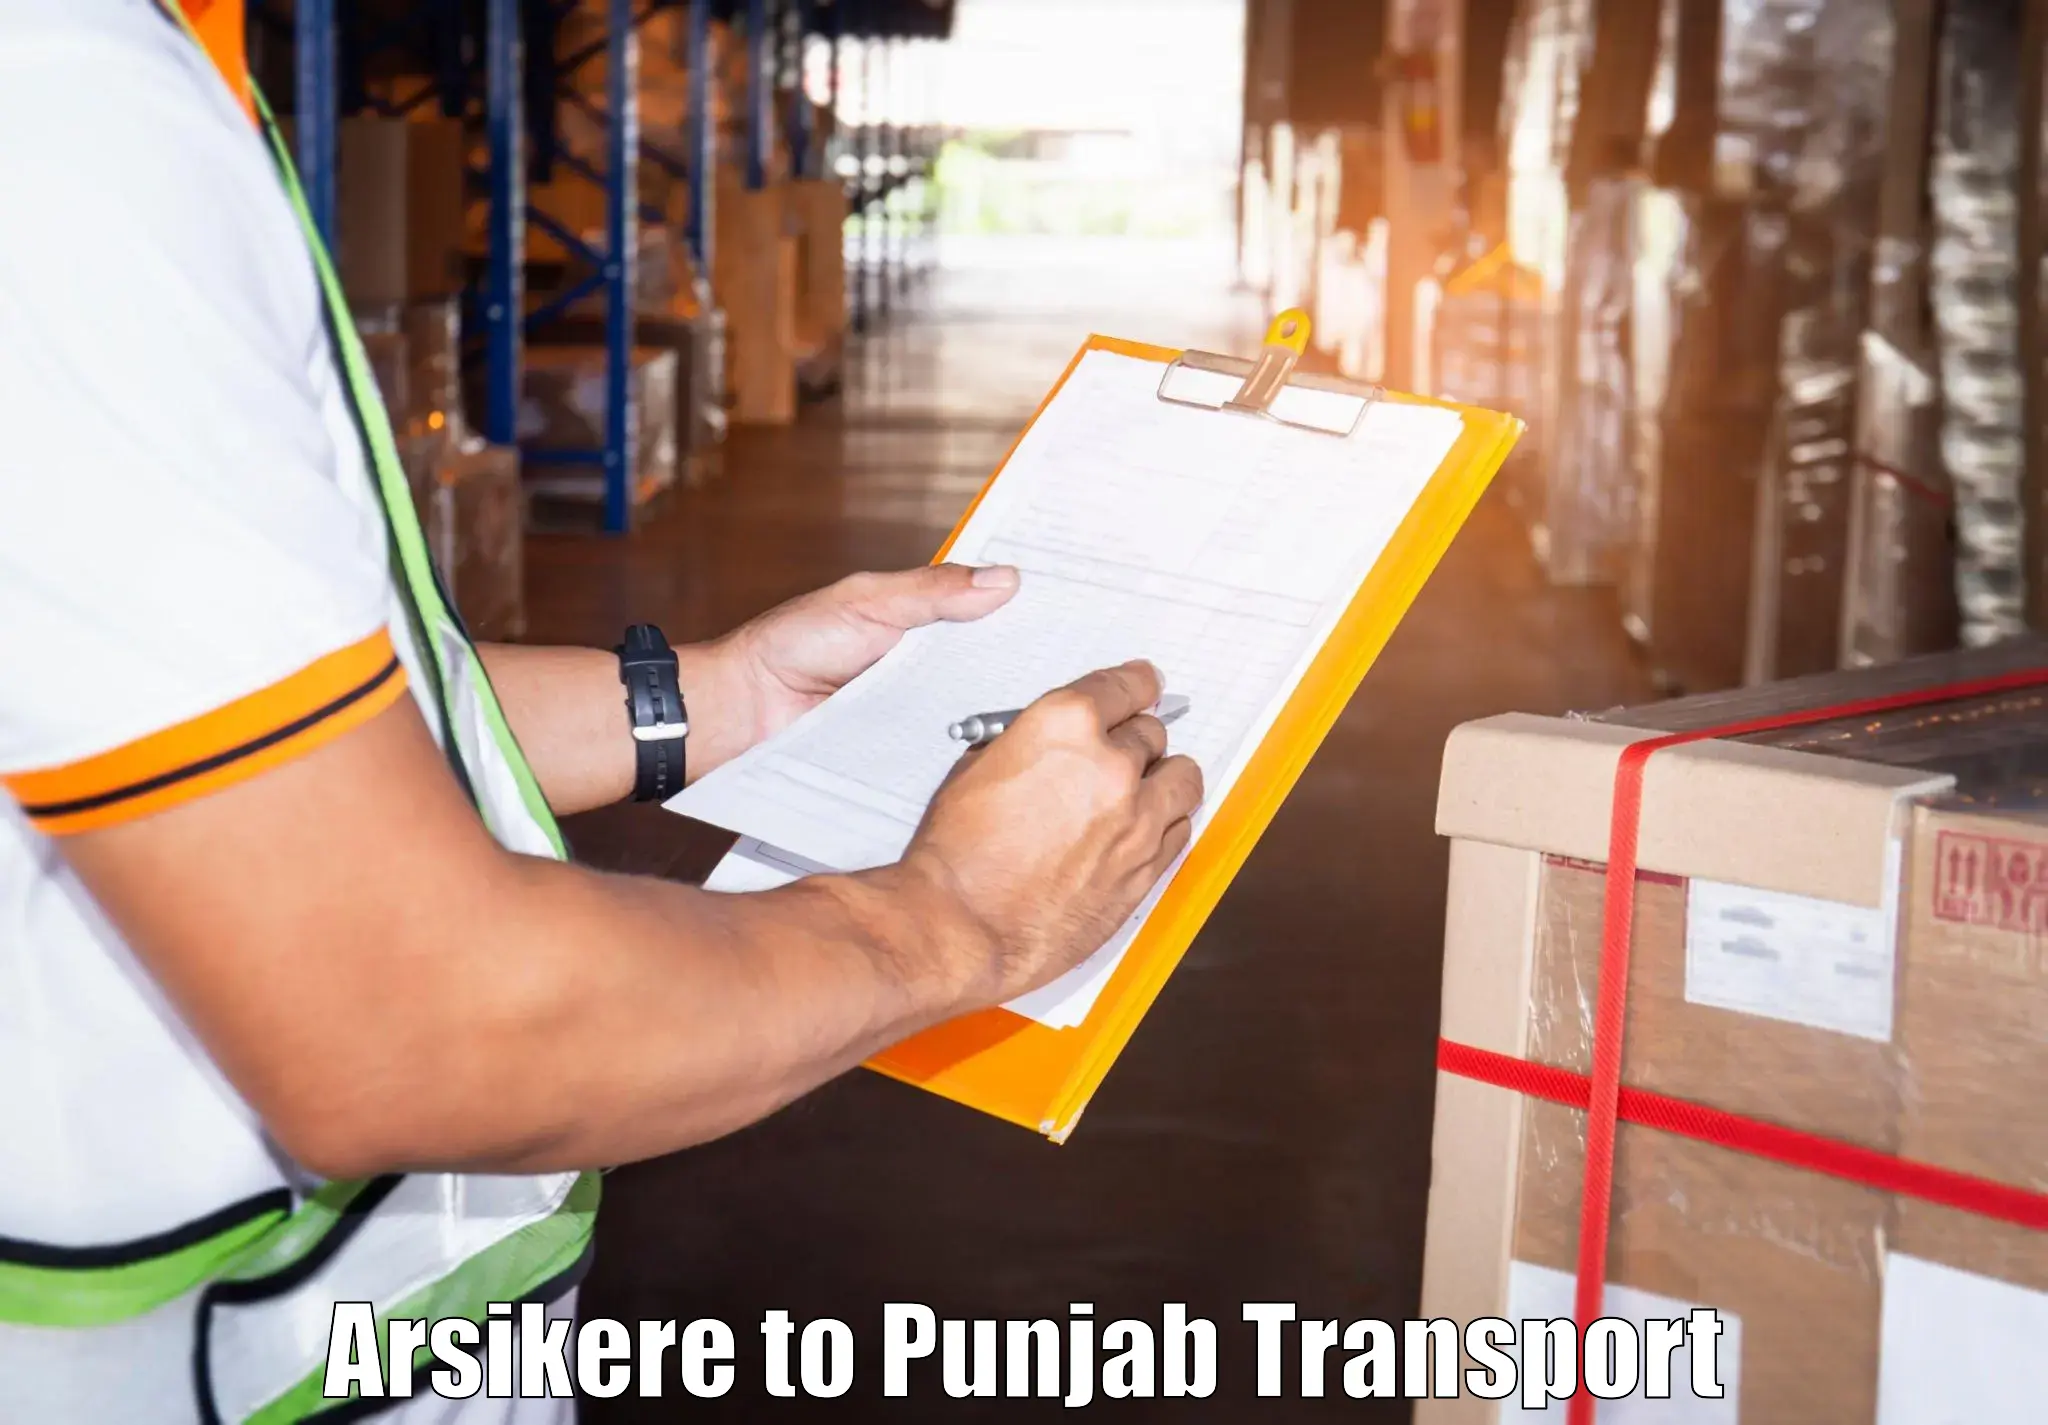 Express transport services Arsikere to Bathinda